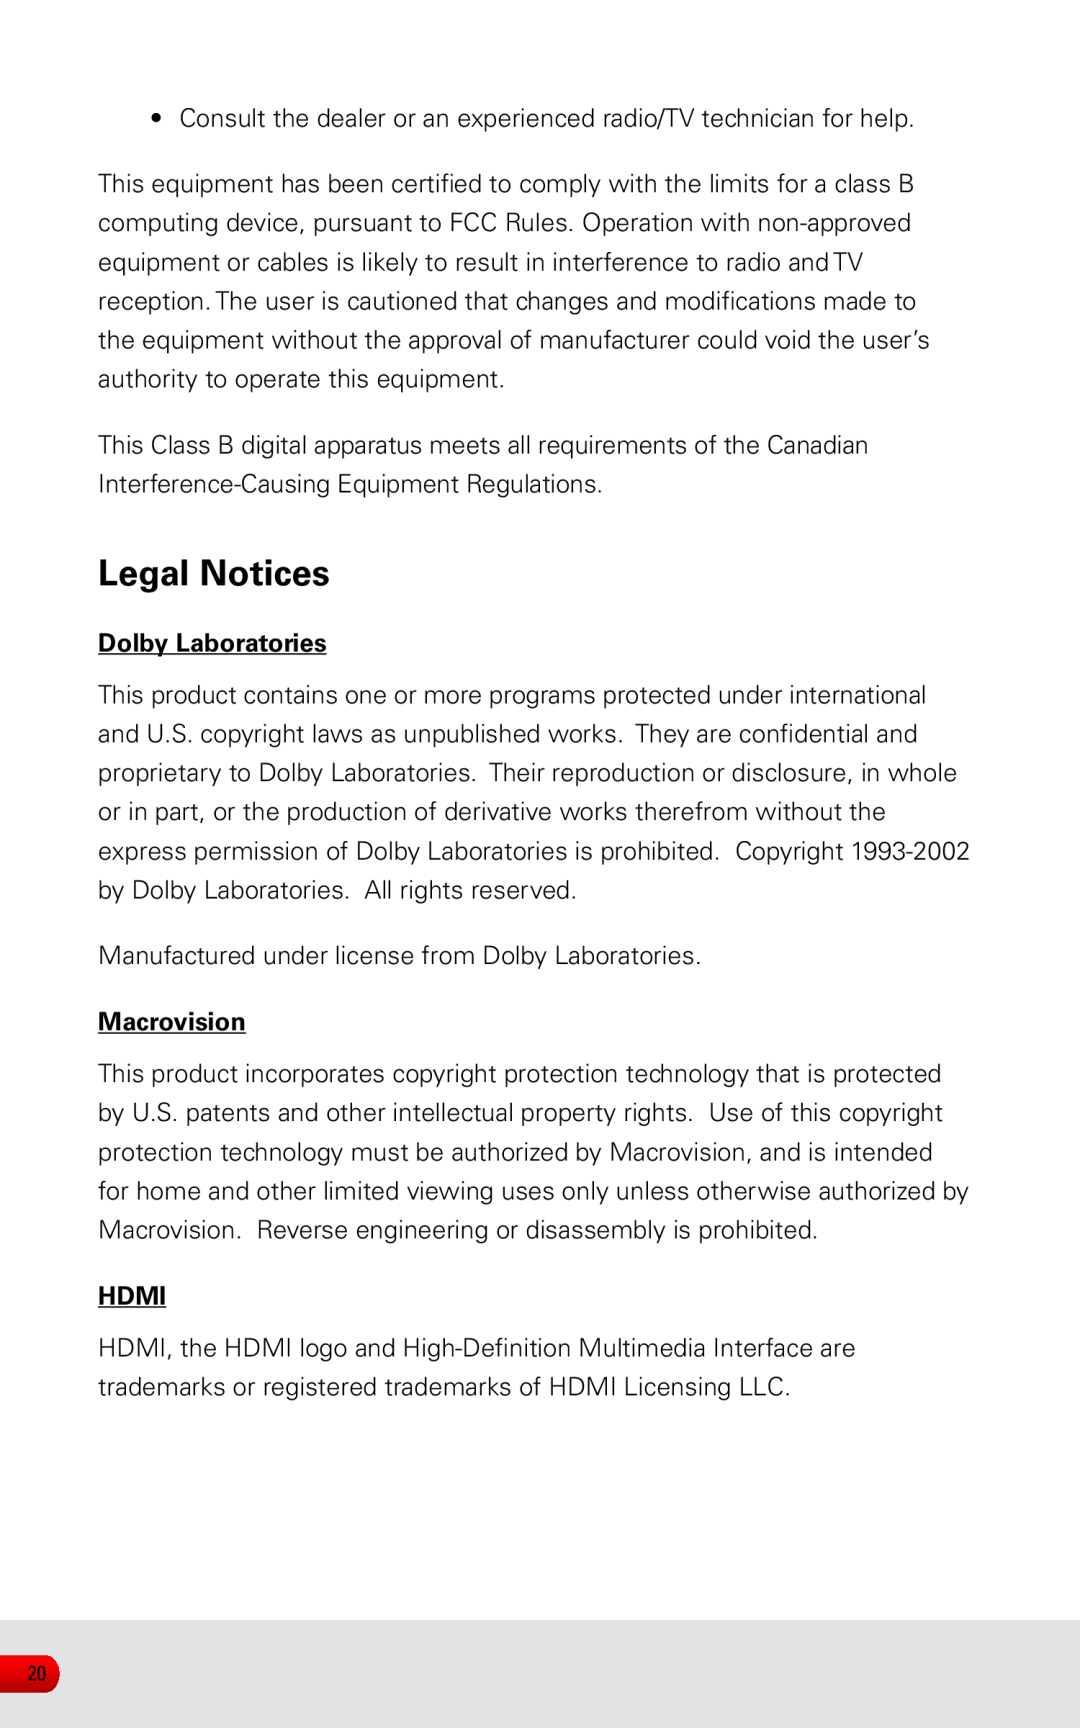 Sling Media KSAFF0500400W1US manual Legal Notices, Dolby Laboratories, Macrovision, Hdmi 